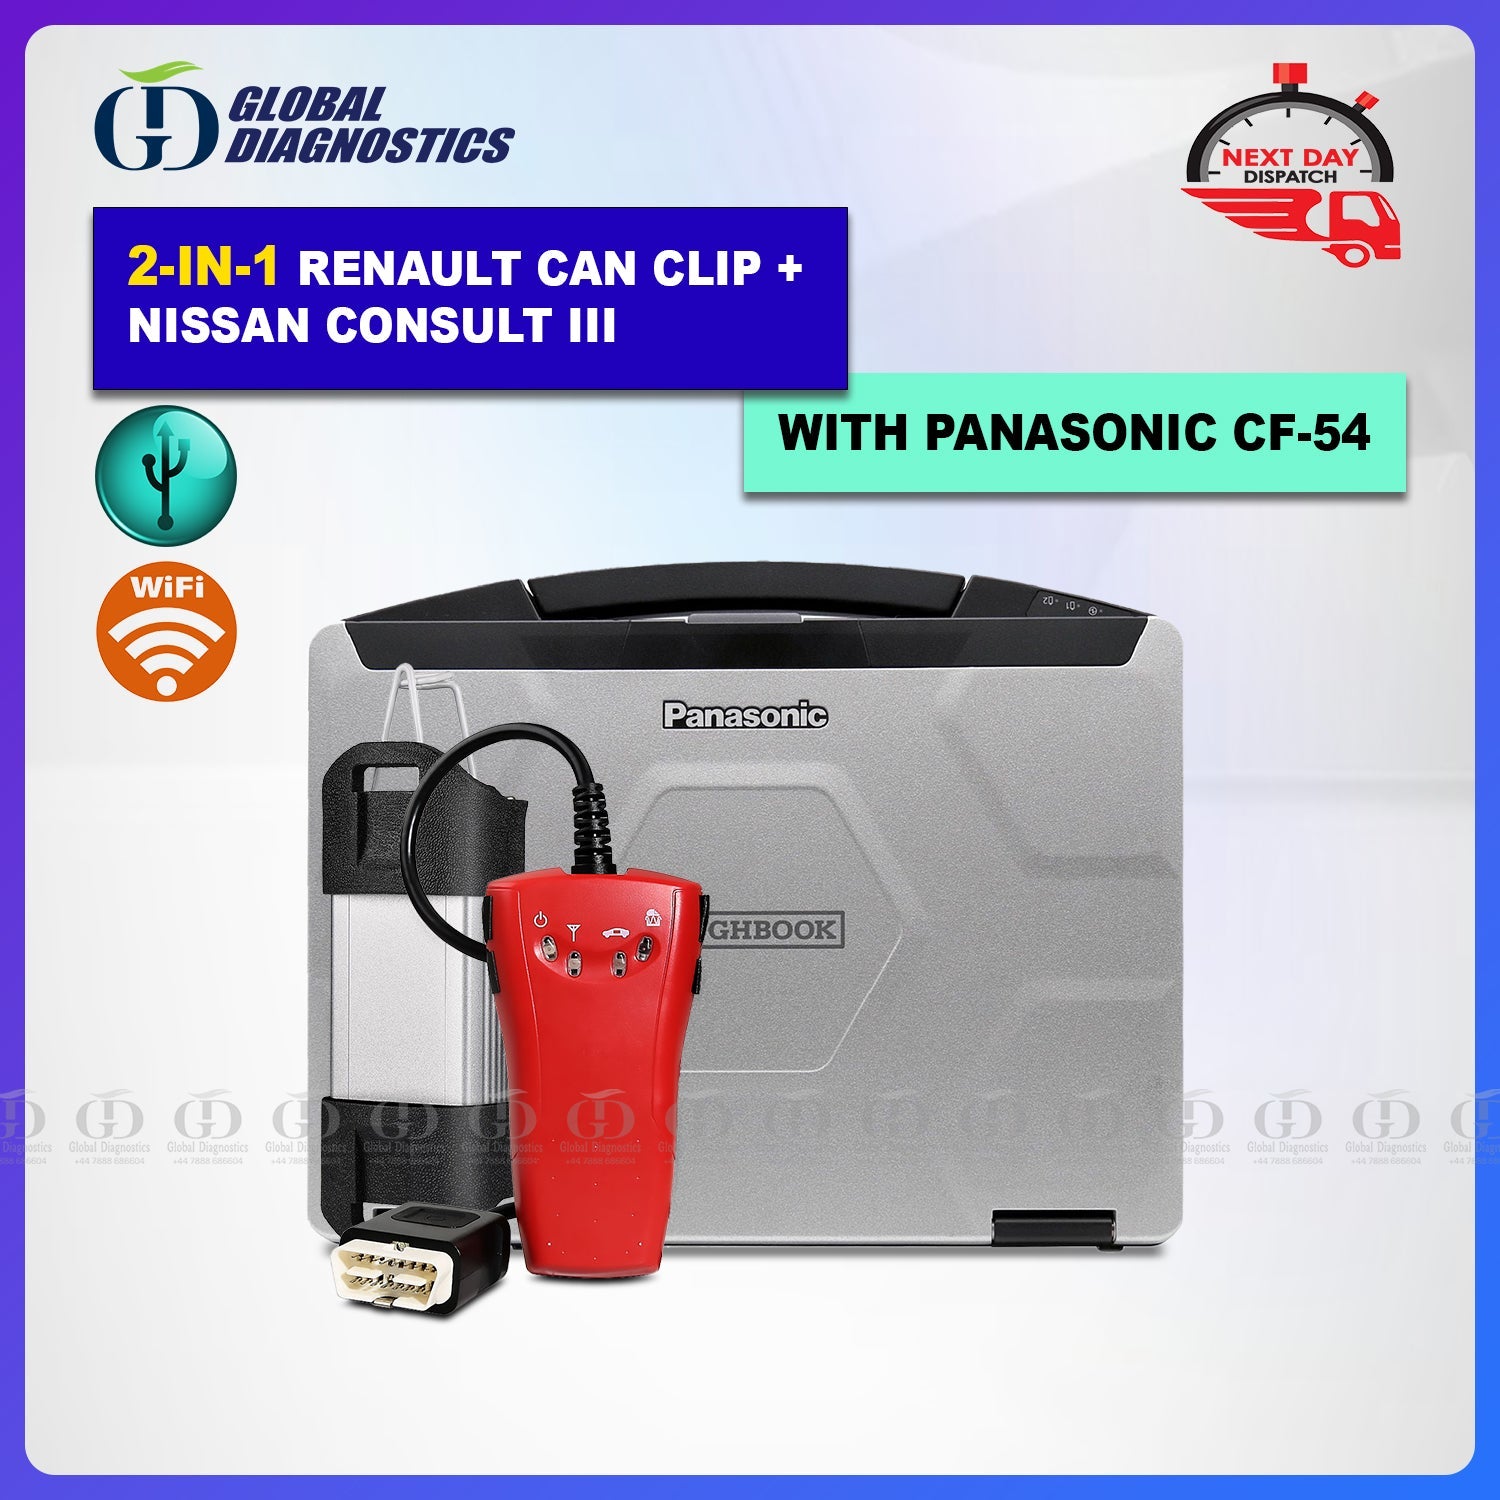 Renault CAN Clip V175 And Consult 3 Consult III Nissan